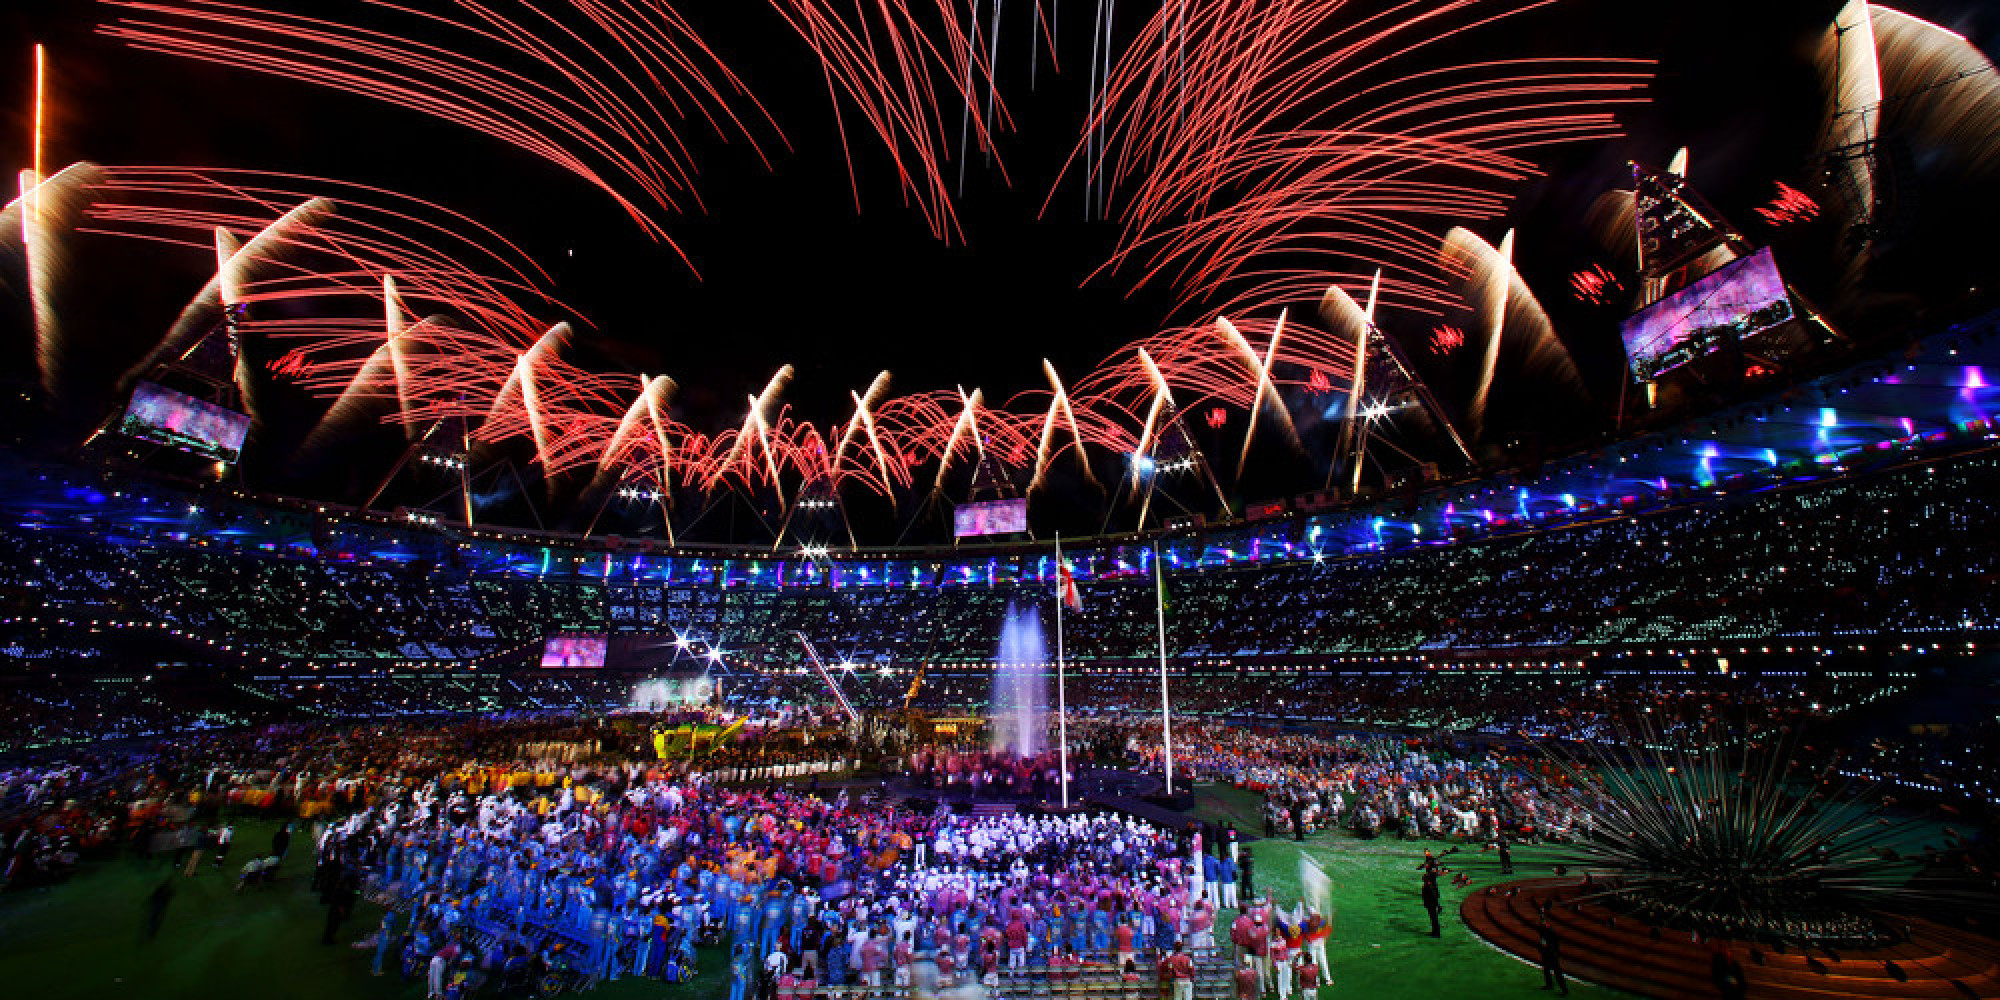 London 'Could Host 2016 Olympics' As Rio Falls Behind ...